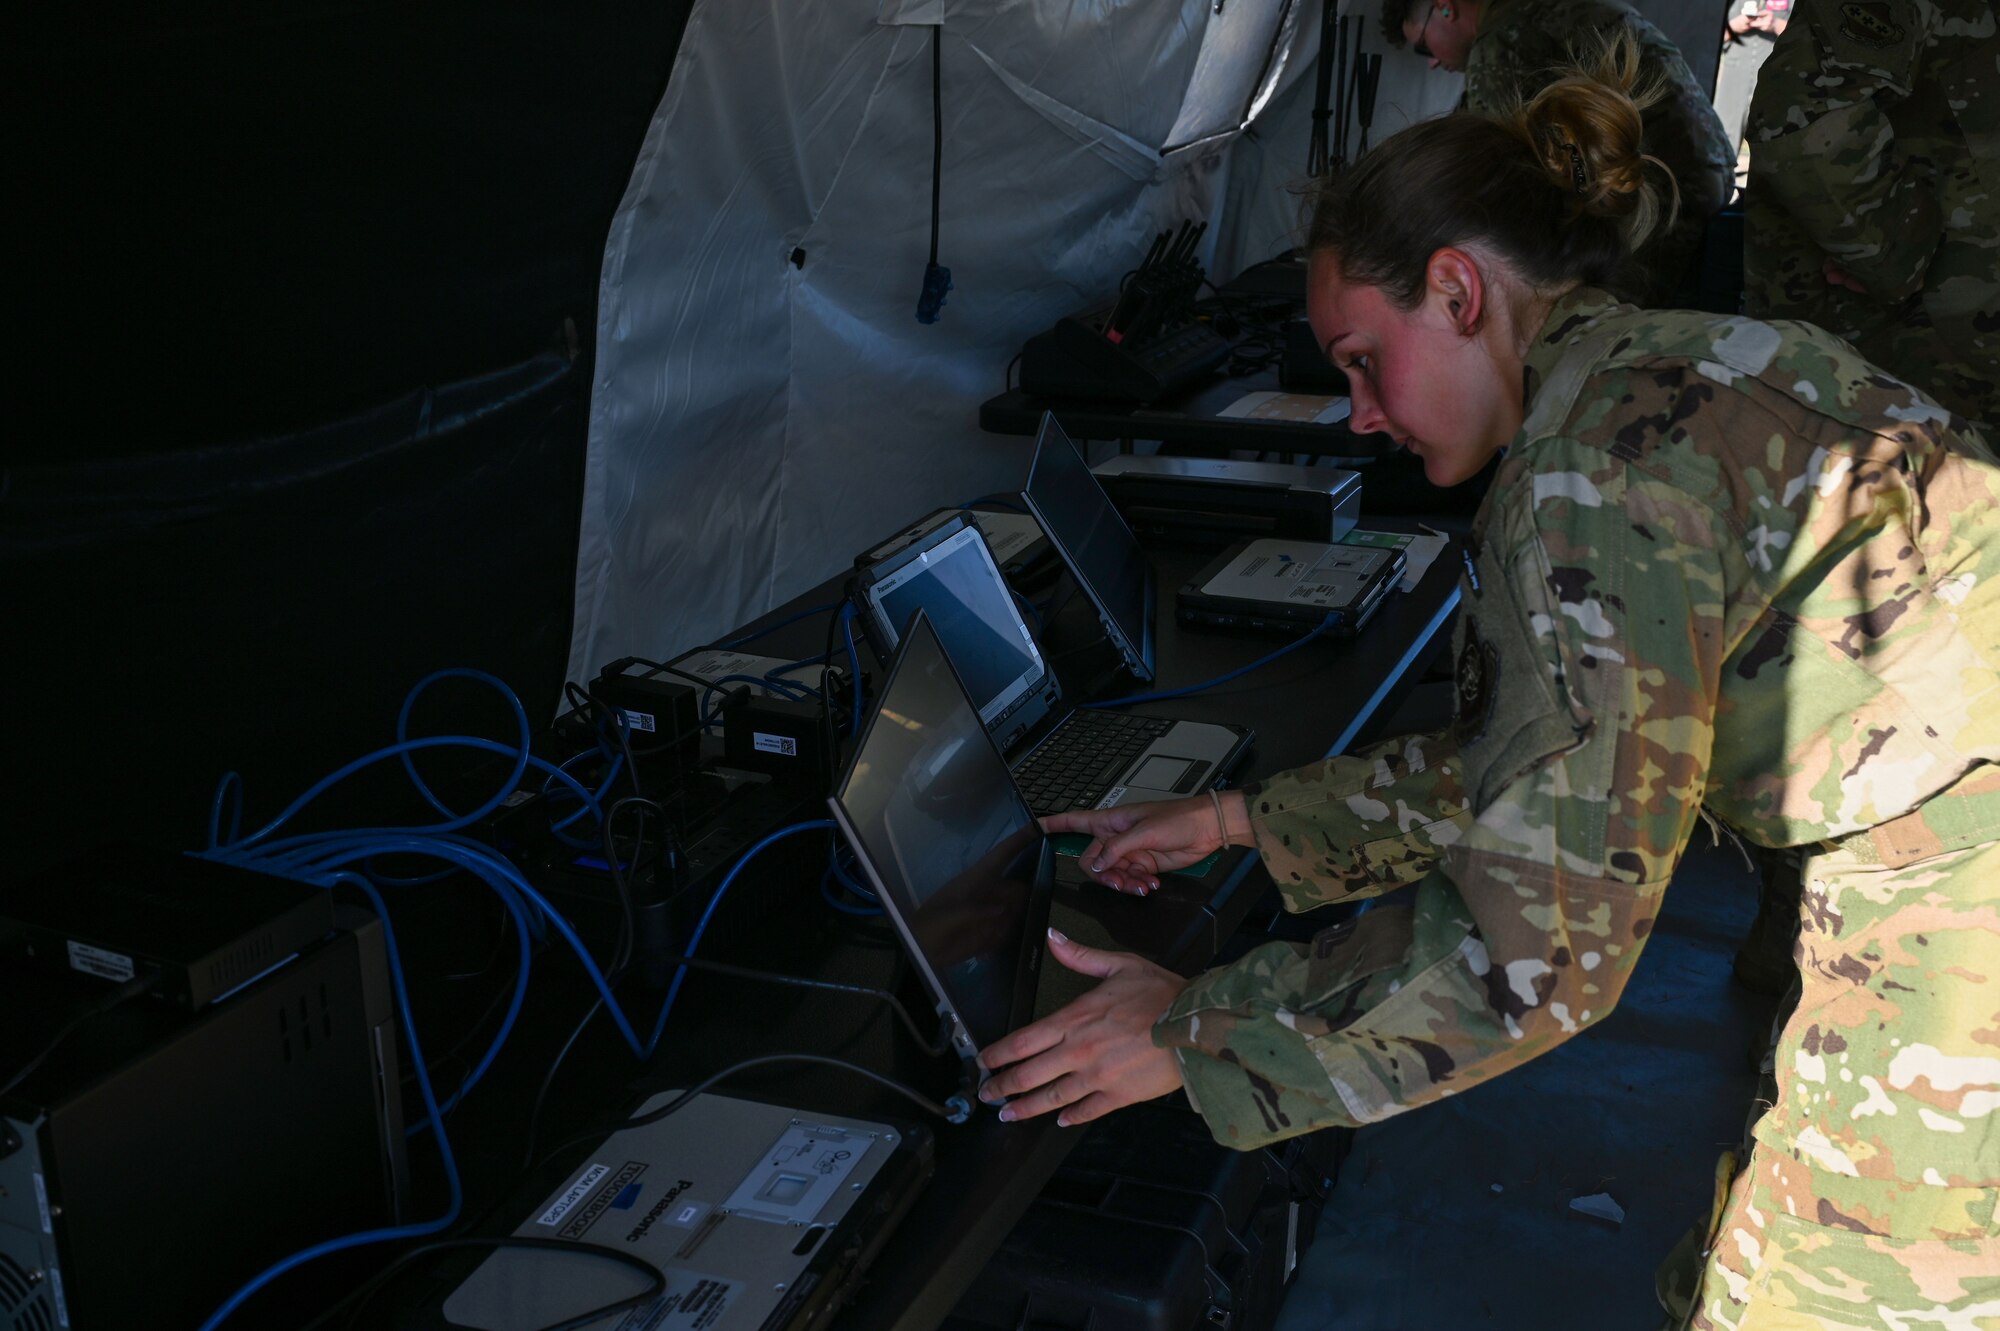 Capt. Anna Santori, 40th Airlift Squadron pilot, assists in setting up communications at Dyess Air Force Base, Texas, Sept. 19, 2023. The Tactical Operating Center demonstration included the set-up of radio communications and secure internet protocol router access. (U.S. Air Force photo by Senior Airman Sophia Robello)